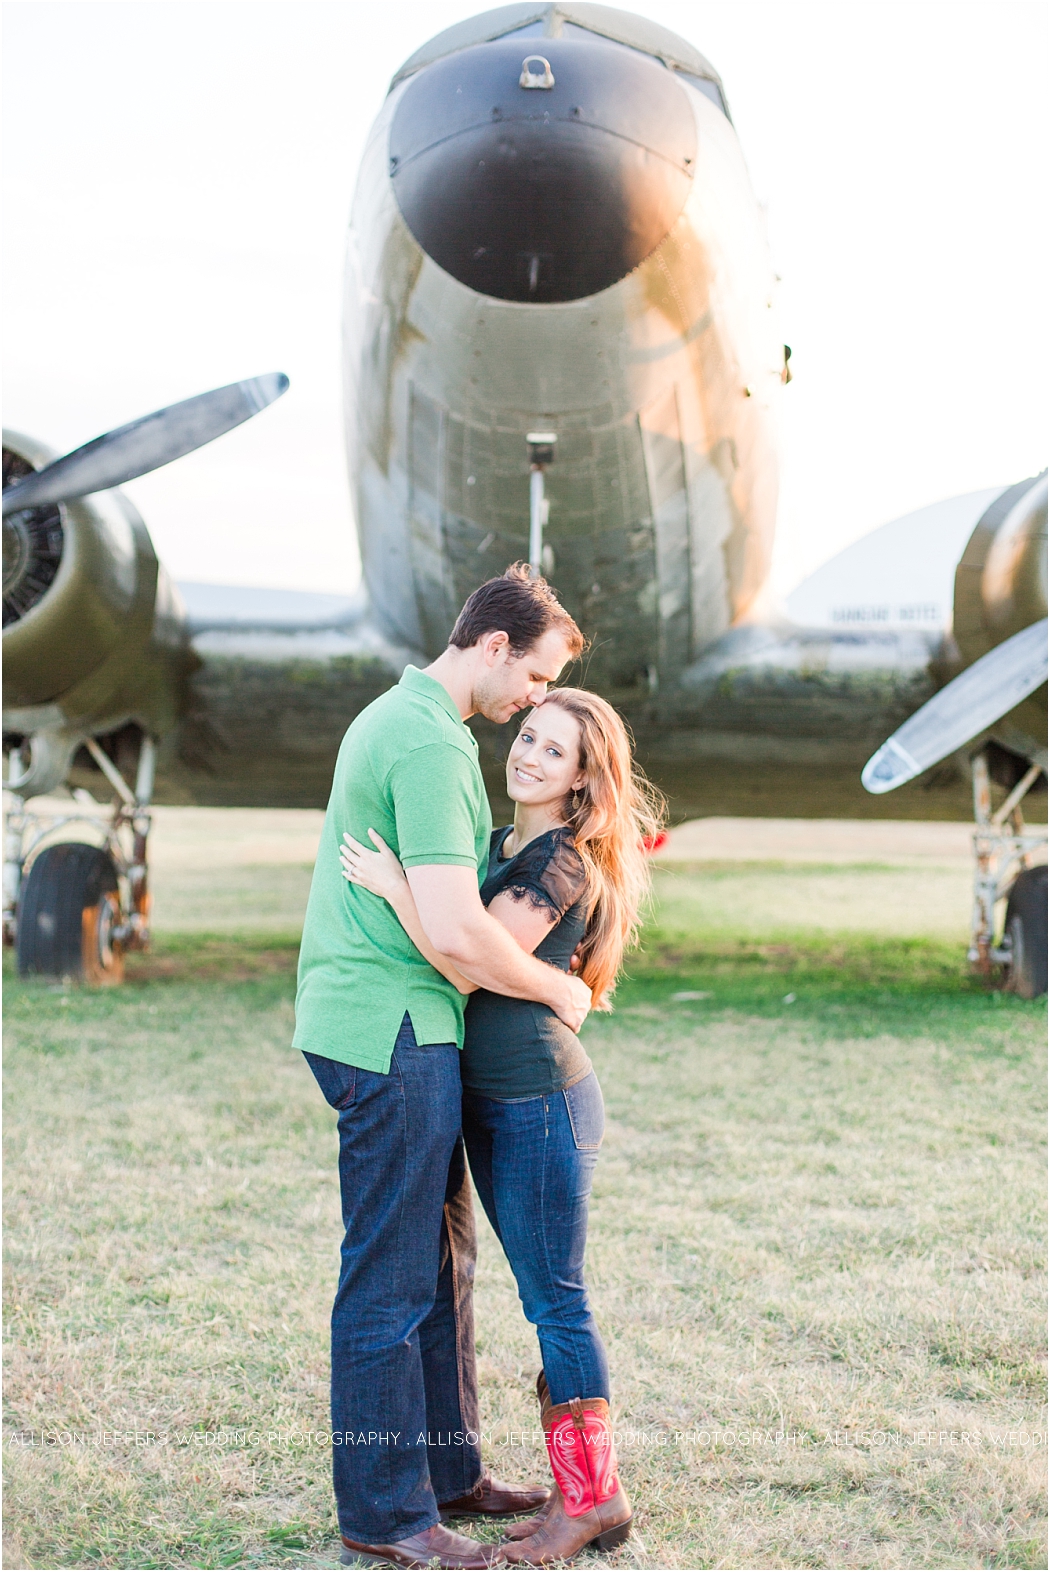 a-fall-engagement-session-in-fredericksburg-texas-by-allison-jeffers-wedding-photography_0037